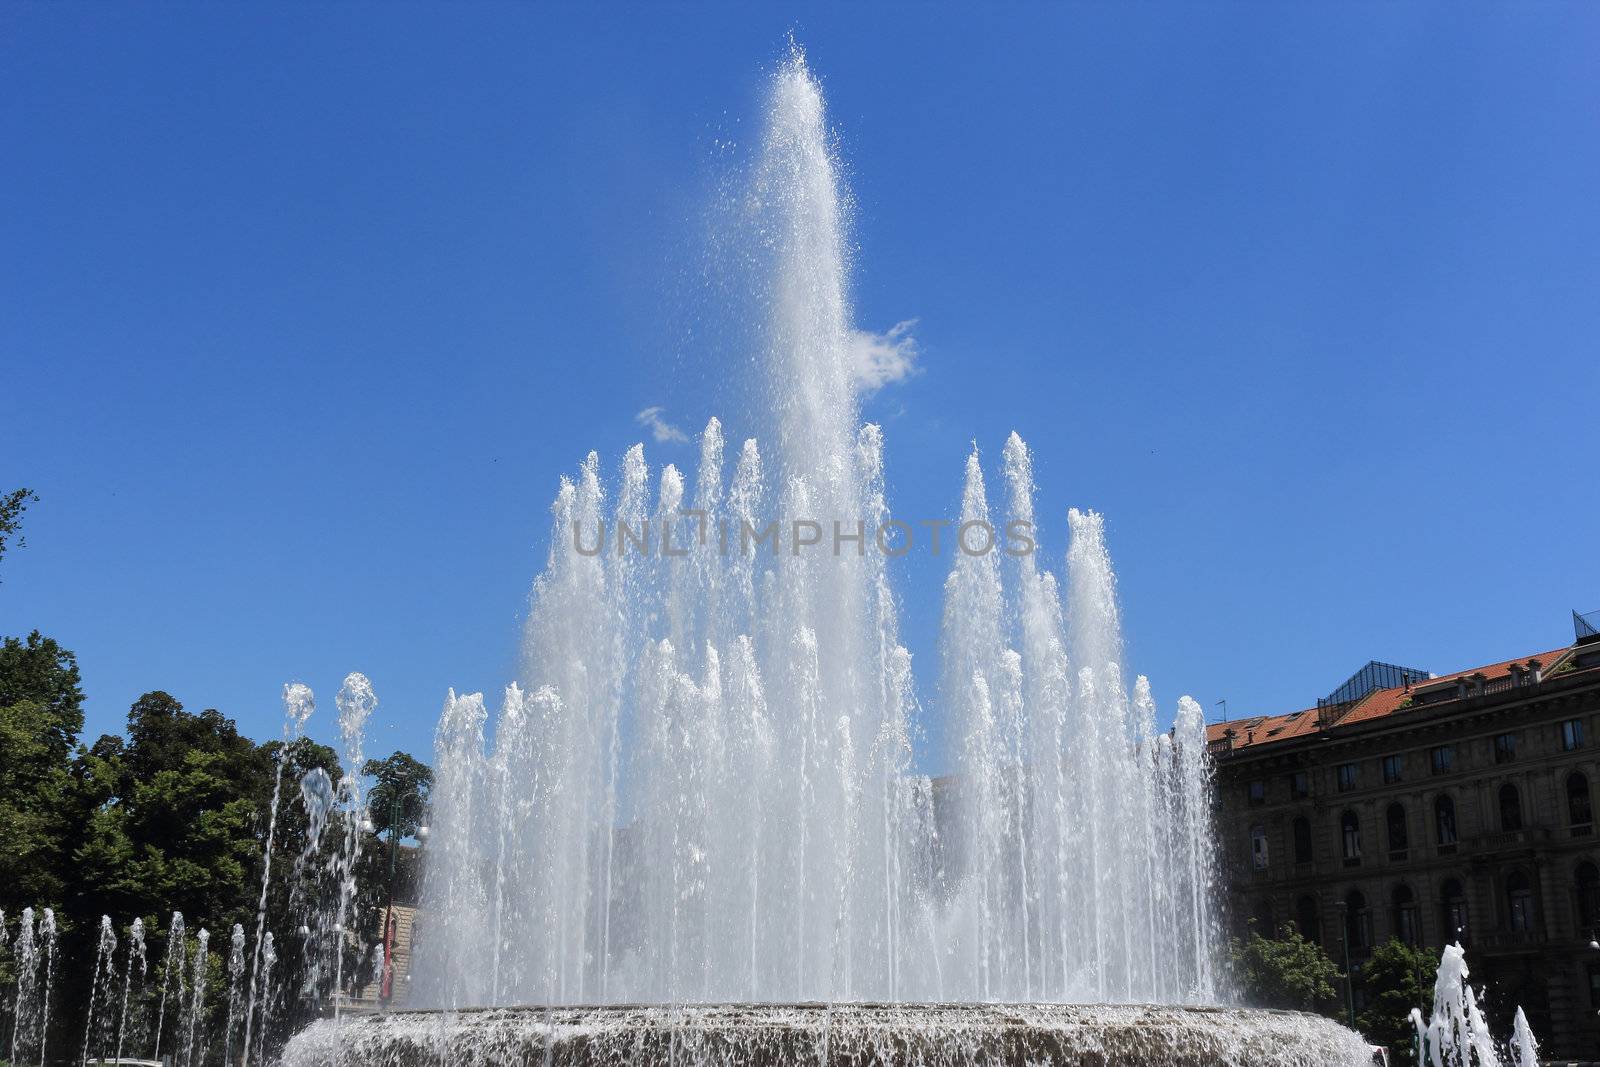 Fountain about castle Sfortsa in the Italian city of Milan